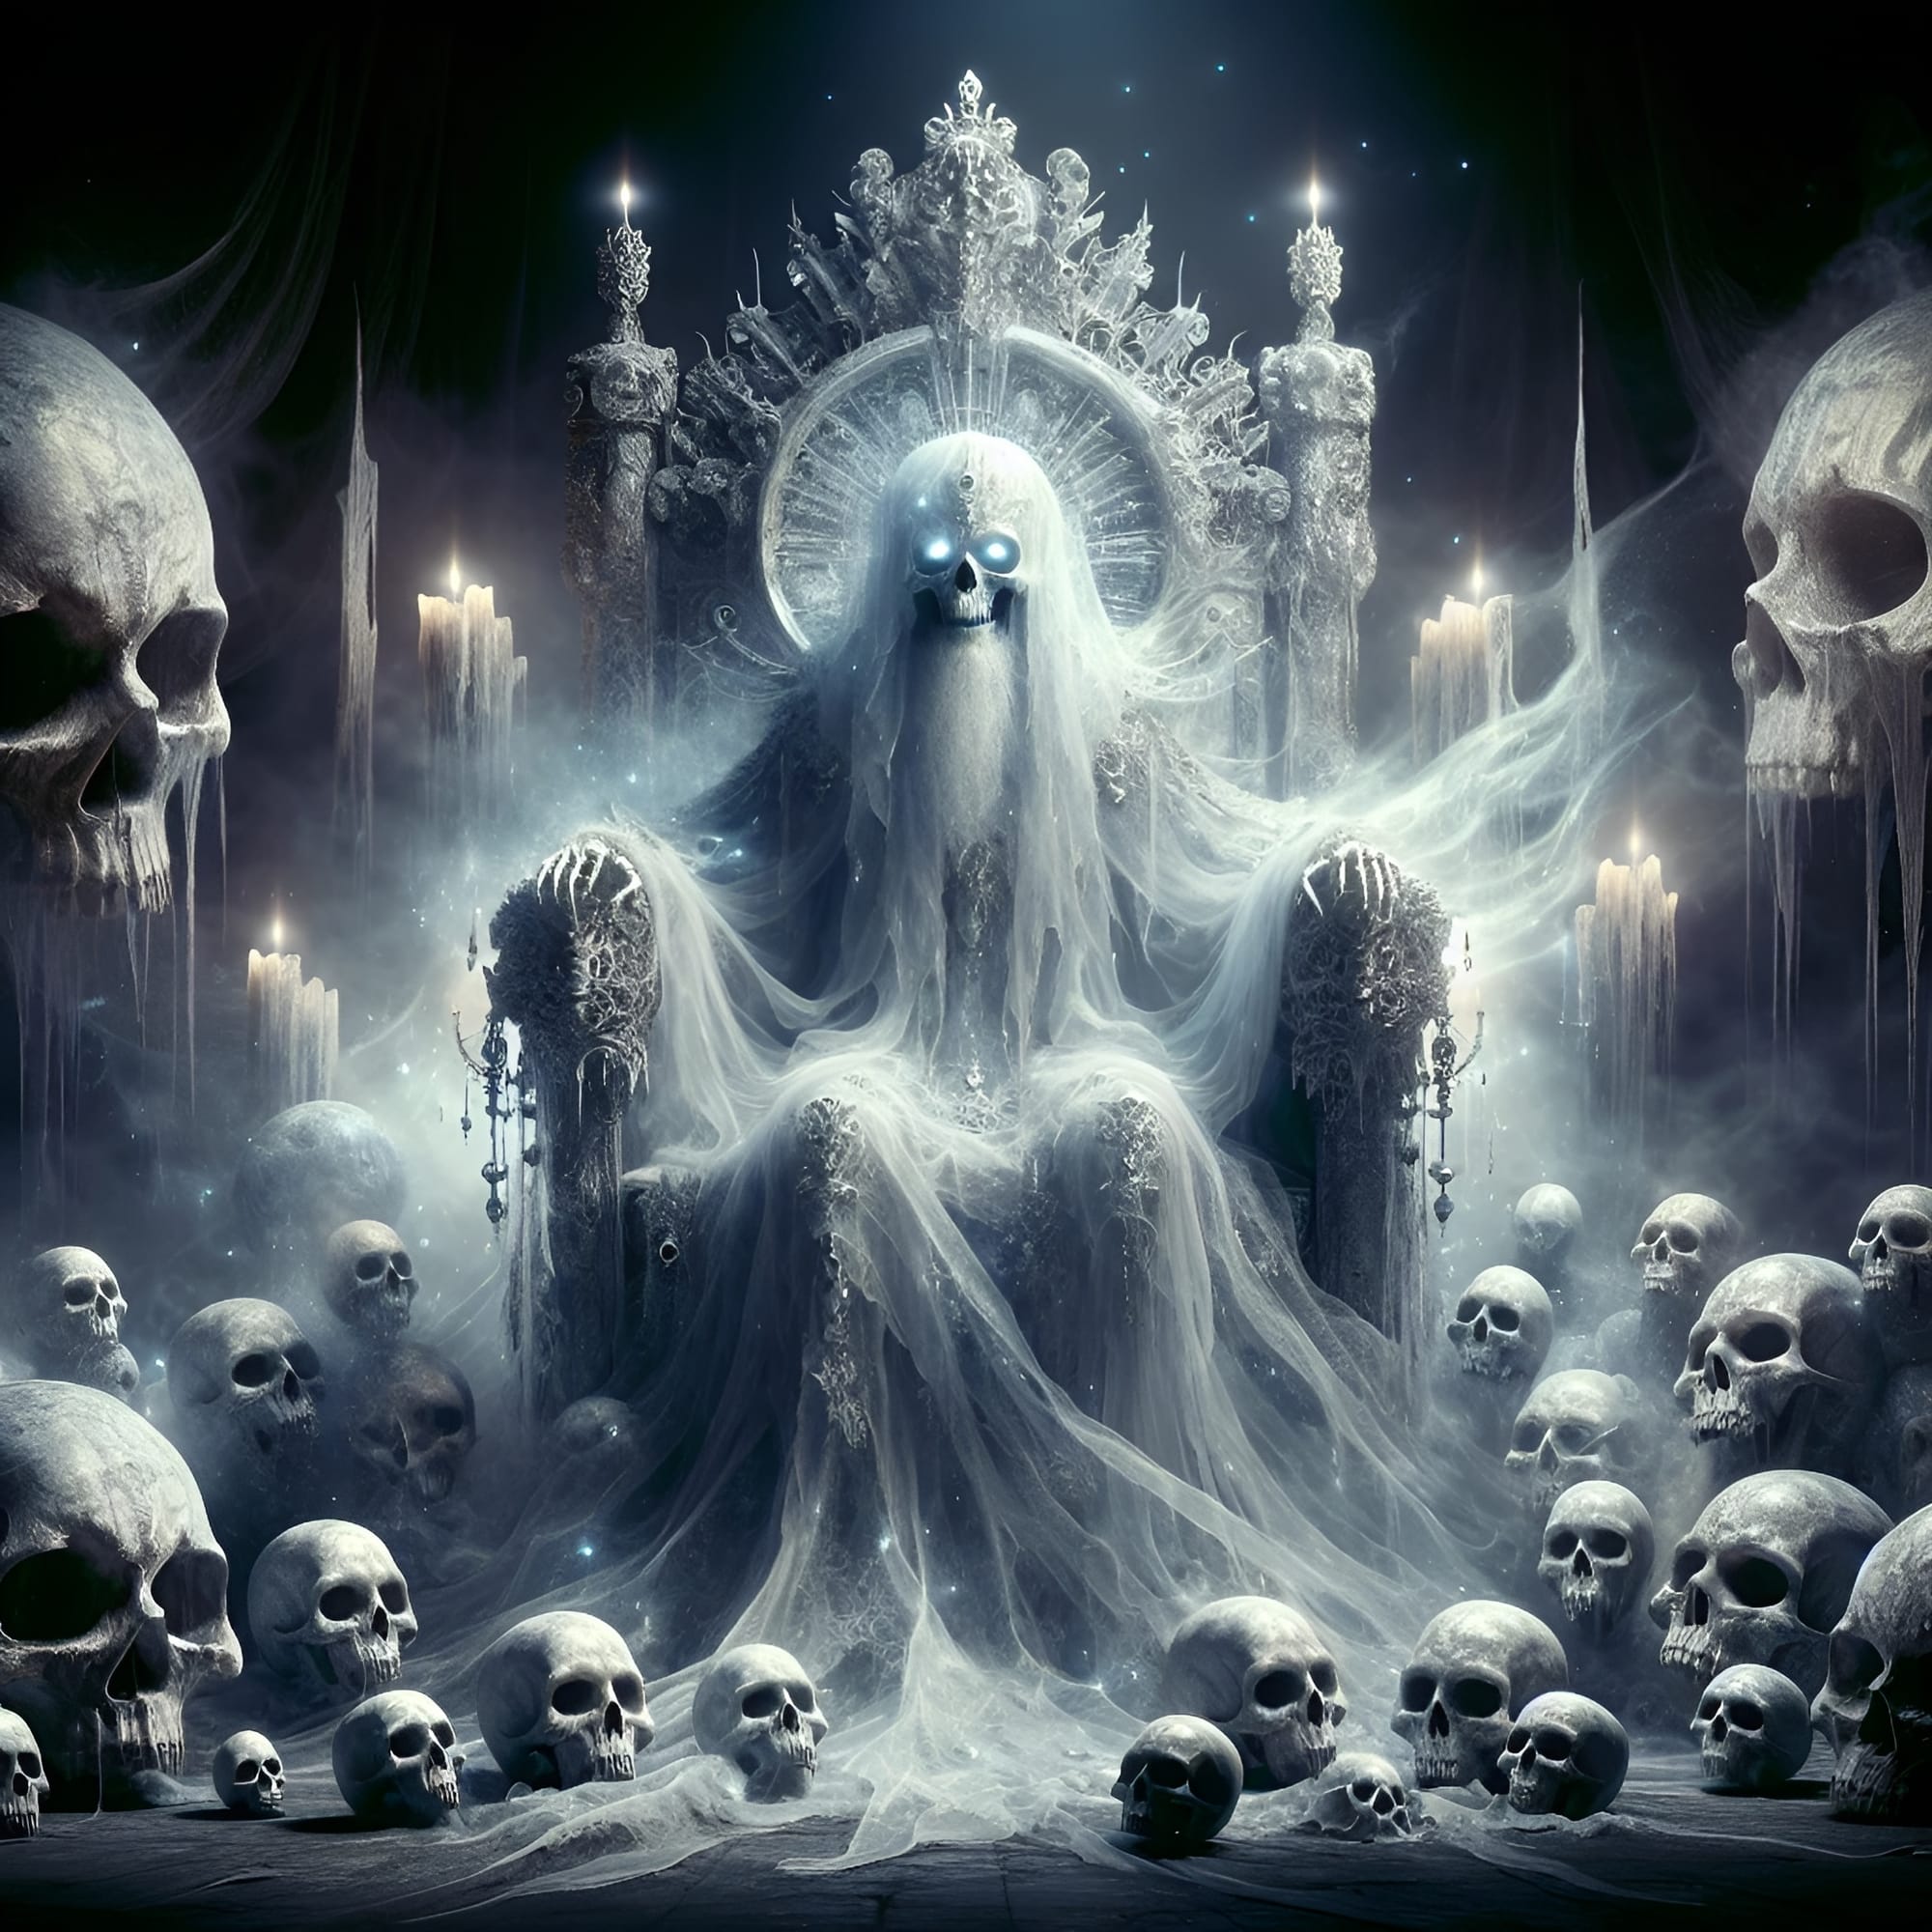 The Ghost King